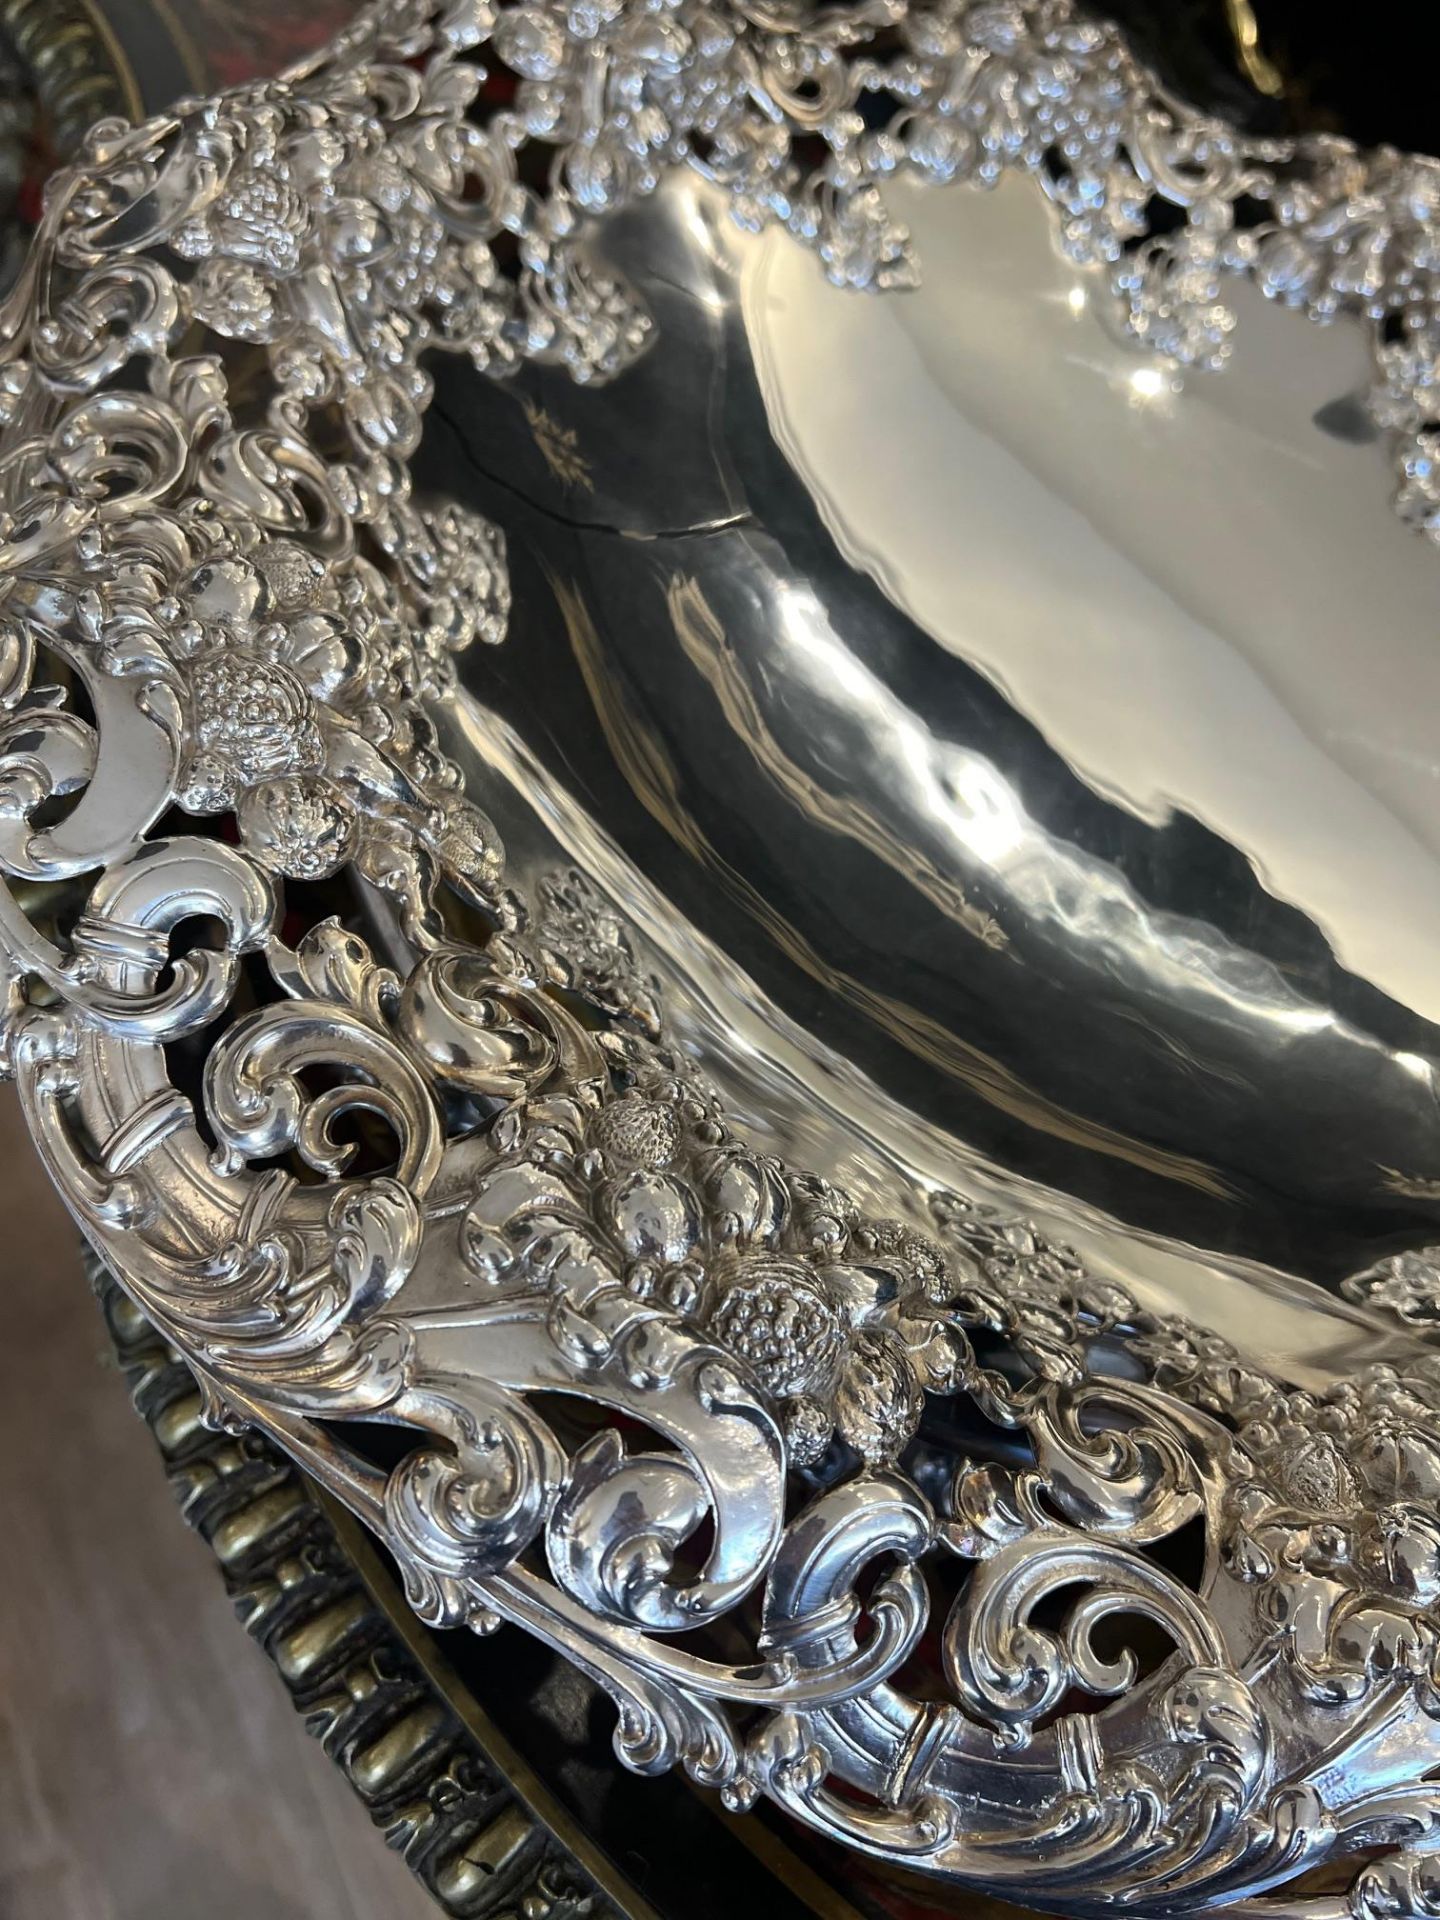 A VERY LARGE STERLING SILVER CENTREPIECE BY GORHAM, C. 1901 AMERICAN - Image 6 of 10